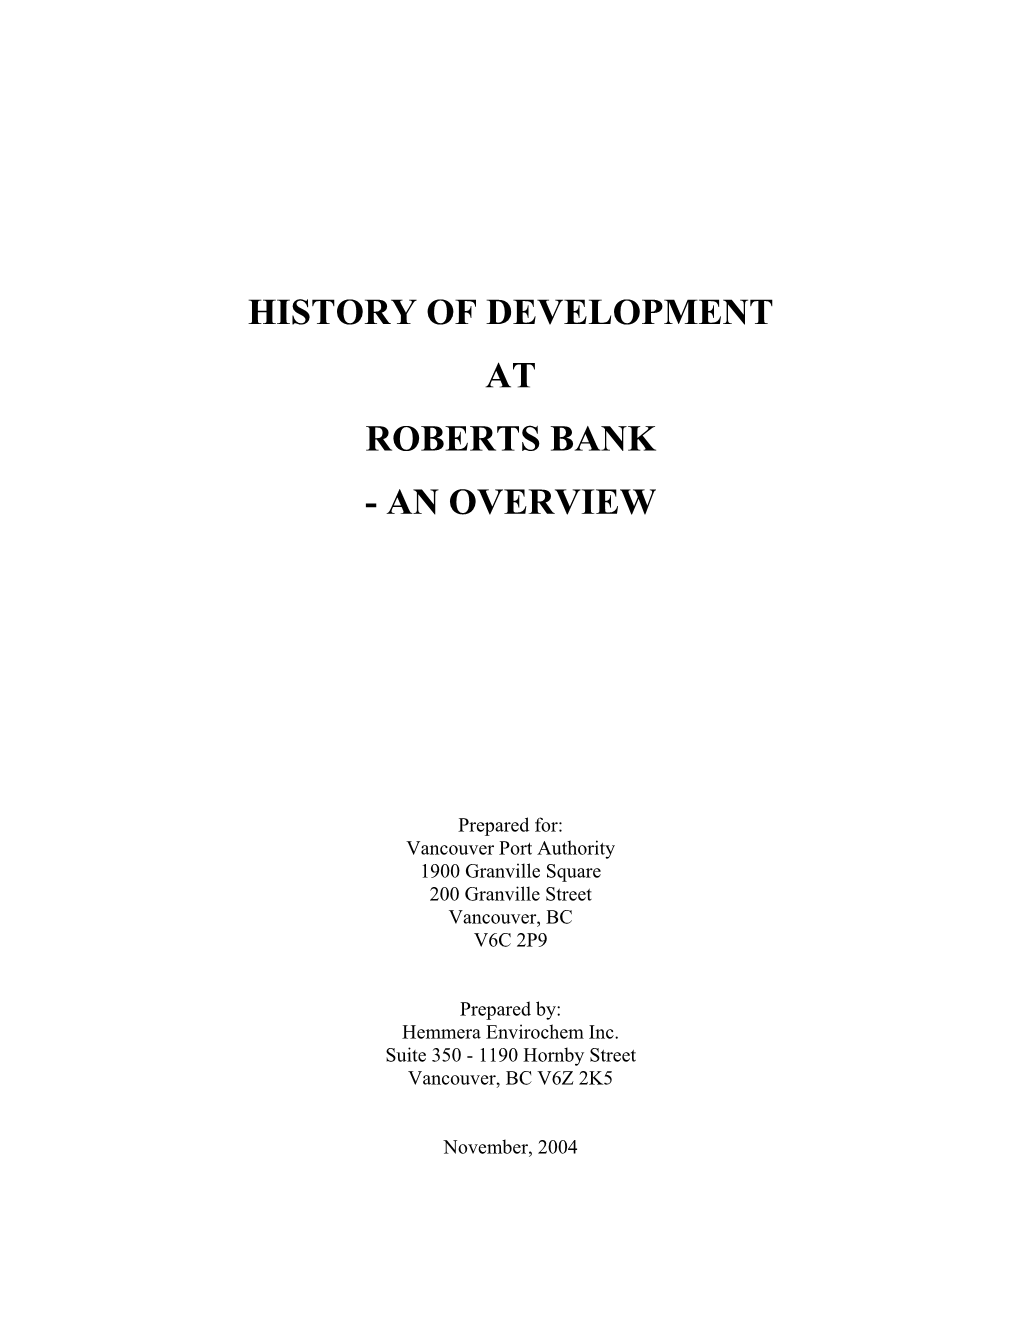 History of Development at Roberts Bank - an Overview